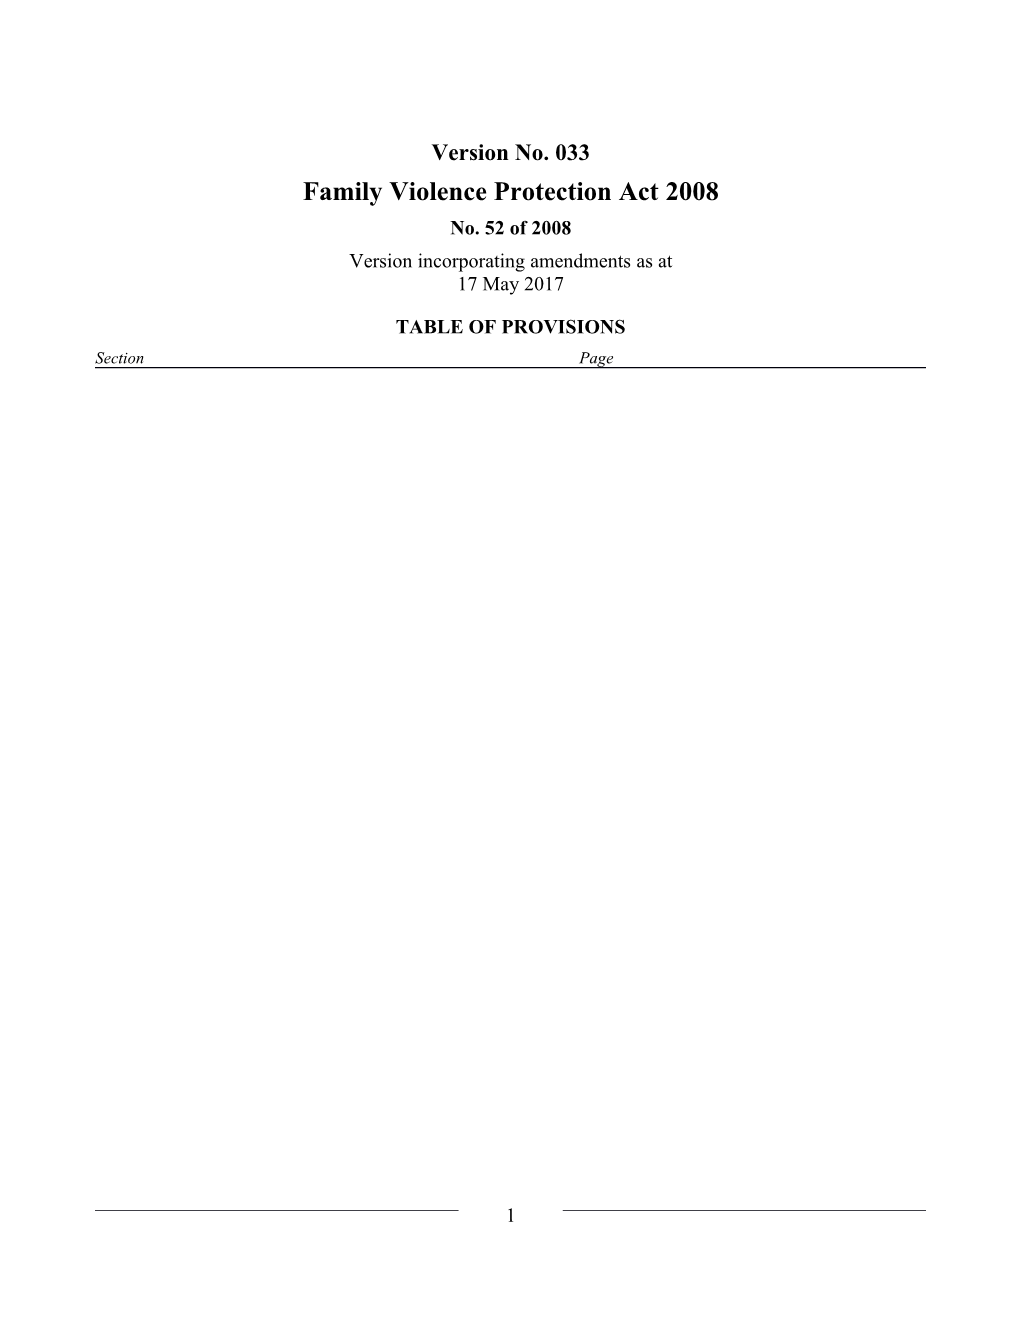 Family Violence Protection Act 2008